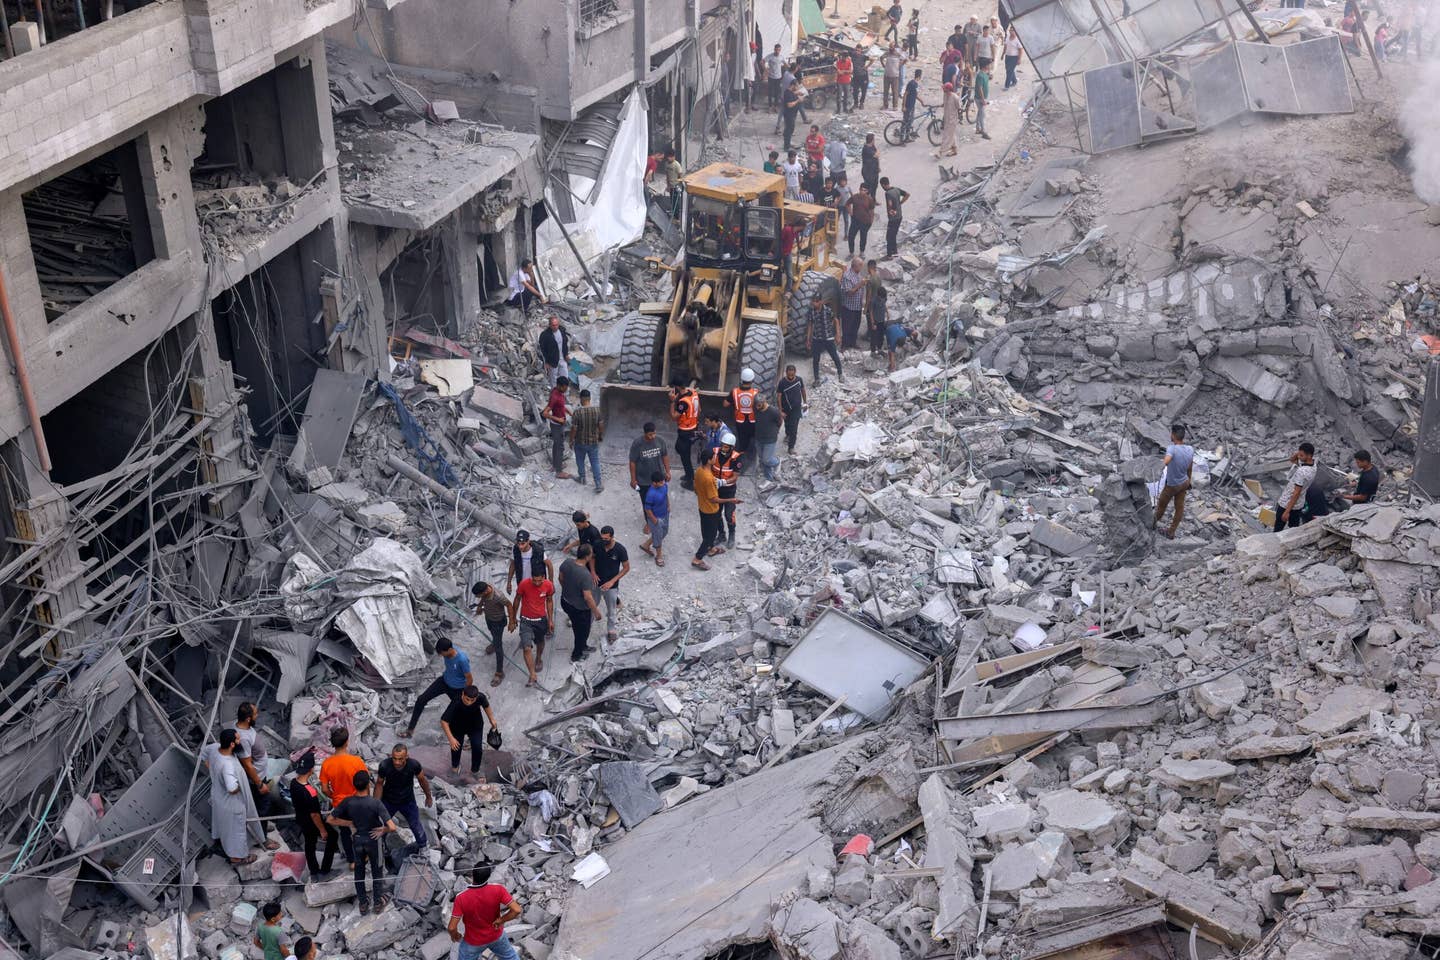 Palestinian civilians and rescuers help clear the rubble in the heavily bombarded city center of Khan Yunis in the southern Gaza Strip following overnight Israeli shelling, on October 10, 2023. (Photo by SAID KHATIB/AFP via Getty Images)